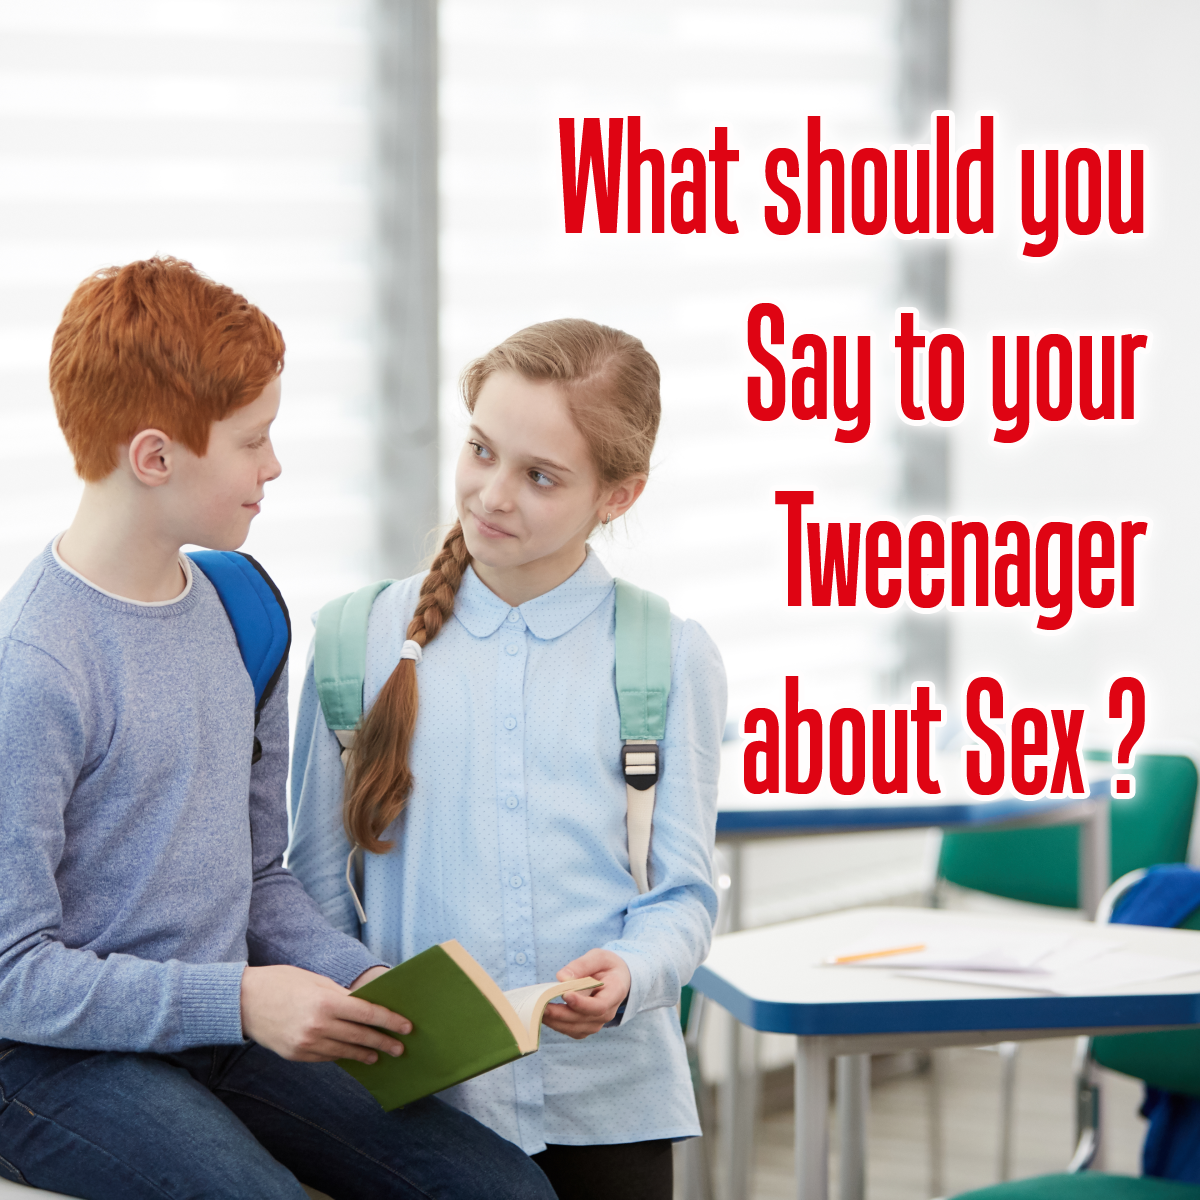 What should you say to your tweenager about sex?